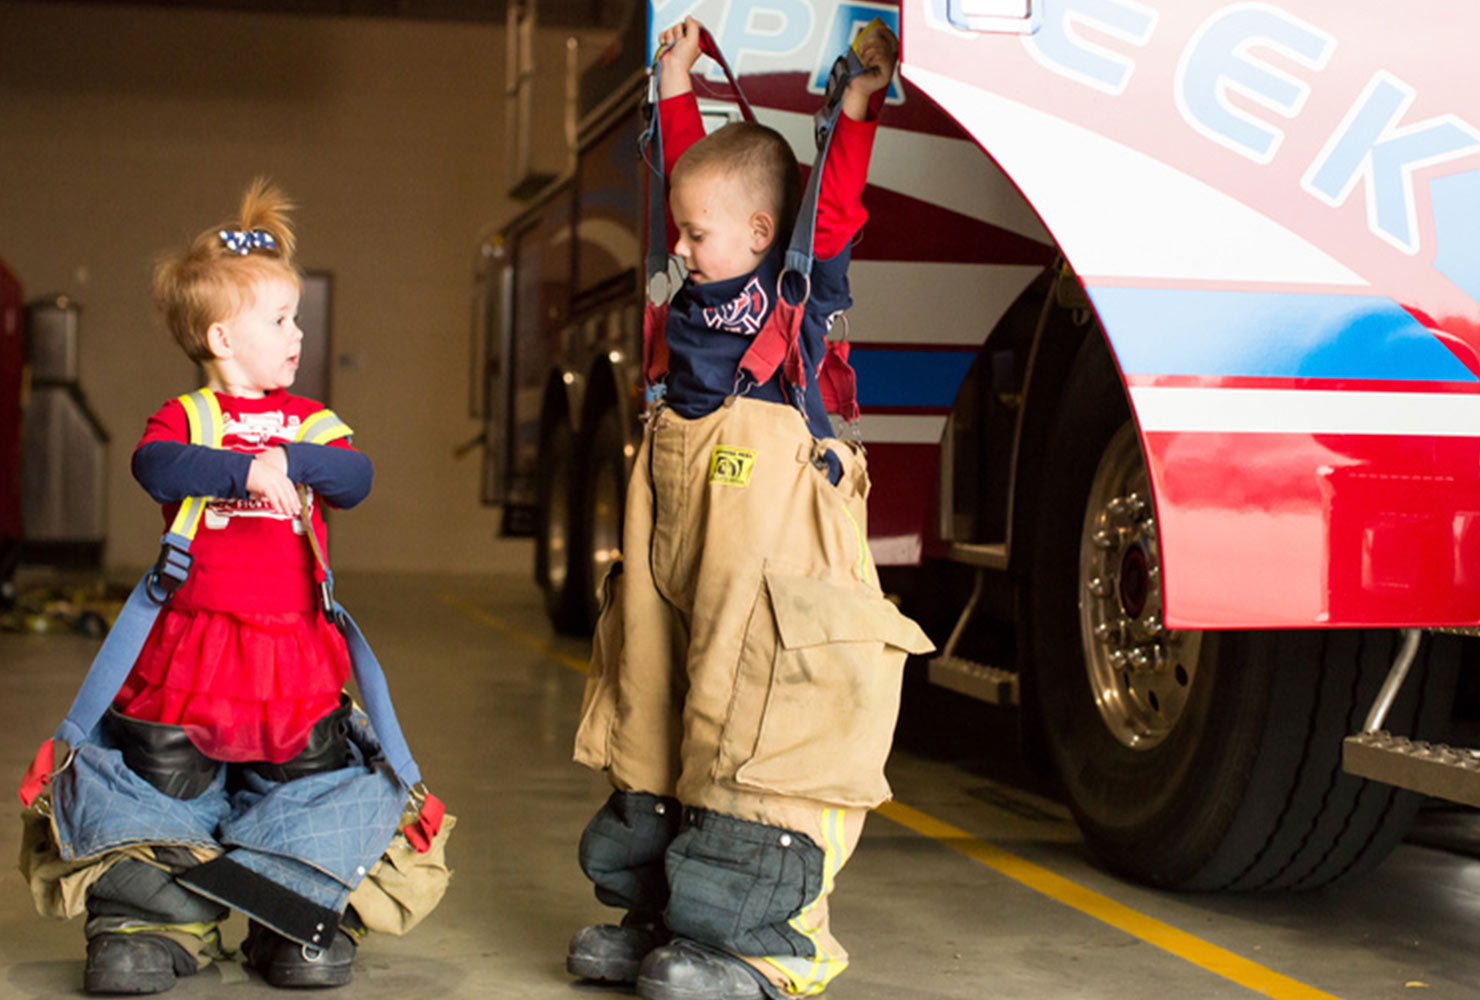 sibling photo ideas firefighter outfit